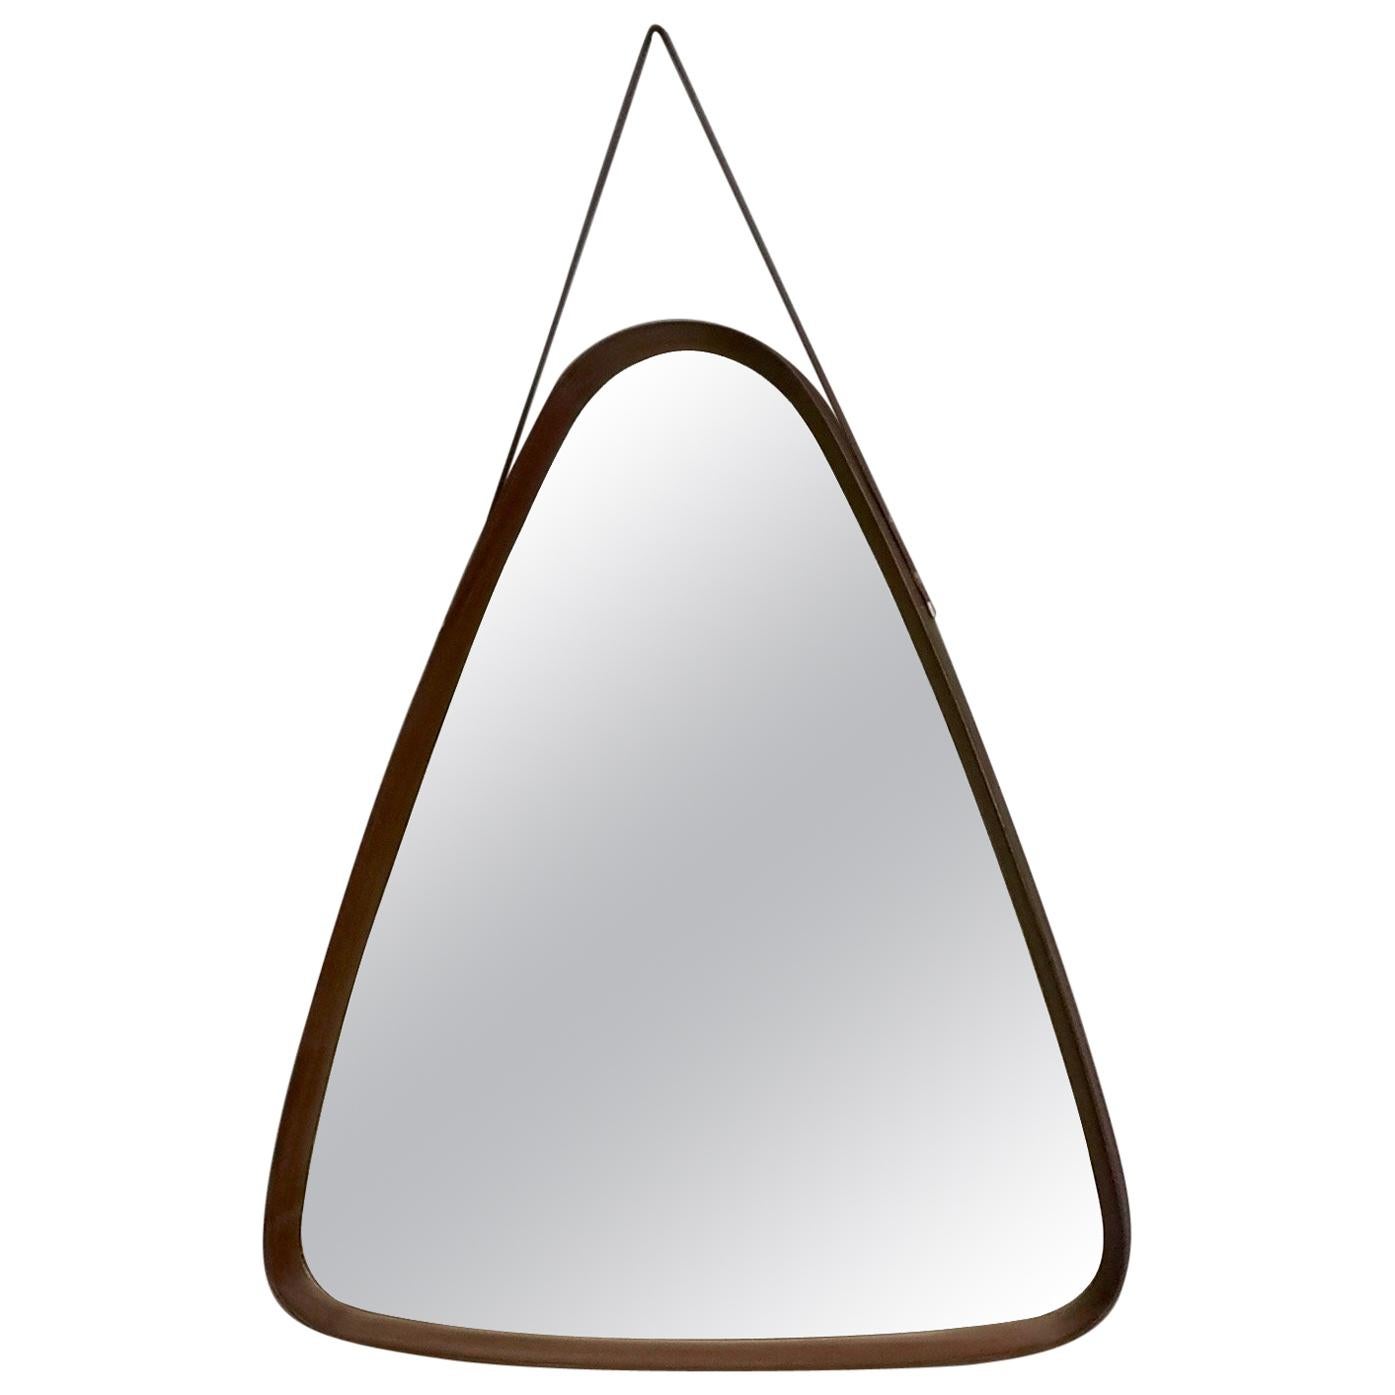 Triangular Wall Mirror with Wooden Frame and a Leather Hook, Italy, 1960s